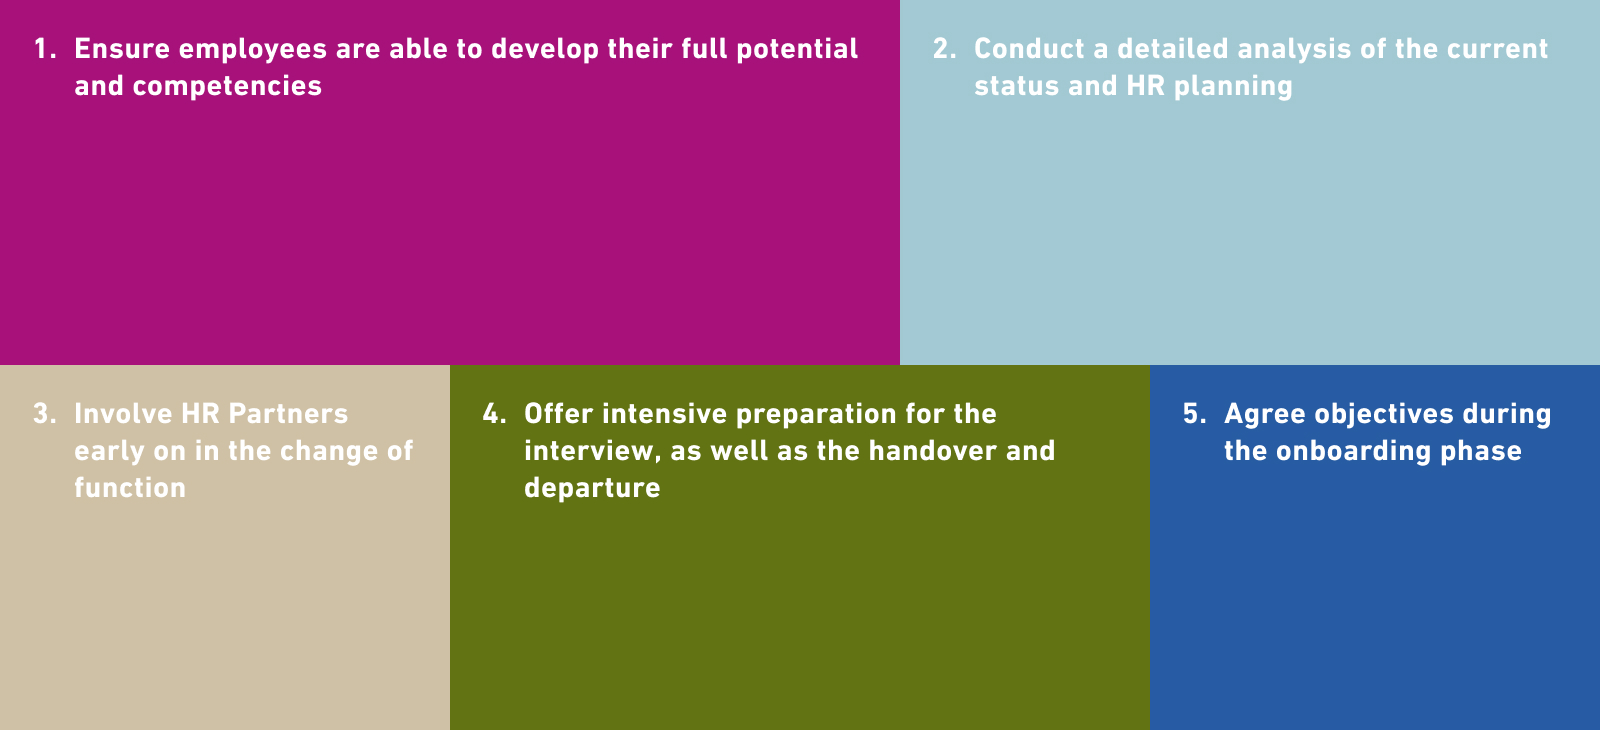 1. Ensure employees are able to develop their full potential and competencies 2. Conduct a detailed analysis of the current status and HR planning 3. Involve HR Partners early on in the change of function 4. Offer intensive preparation for the interview, as well as the handover and departure 5. Agree objectives during the onboarding phase